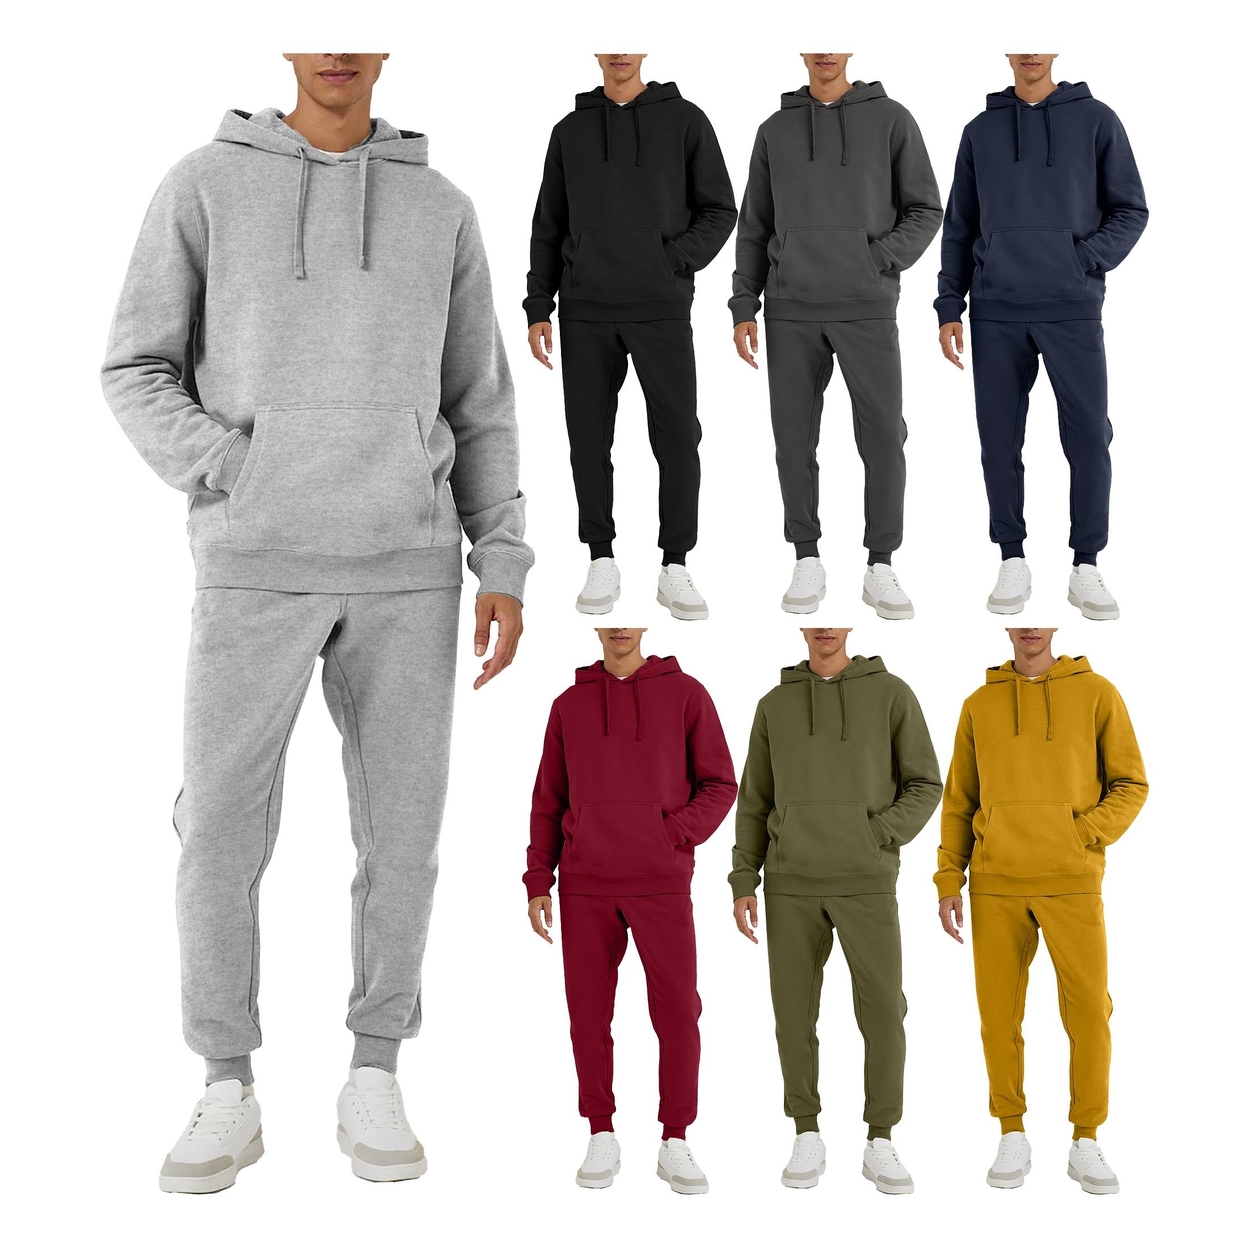 Multi-Pack: Men's Big & Tall Athletic Active Jogging Winter Warm Fleece Lined Pullover Tracksuit Set - Grey, 2-pack, X-large